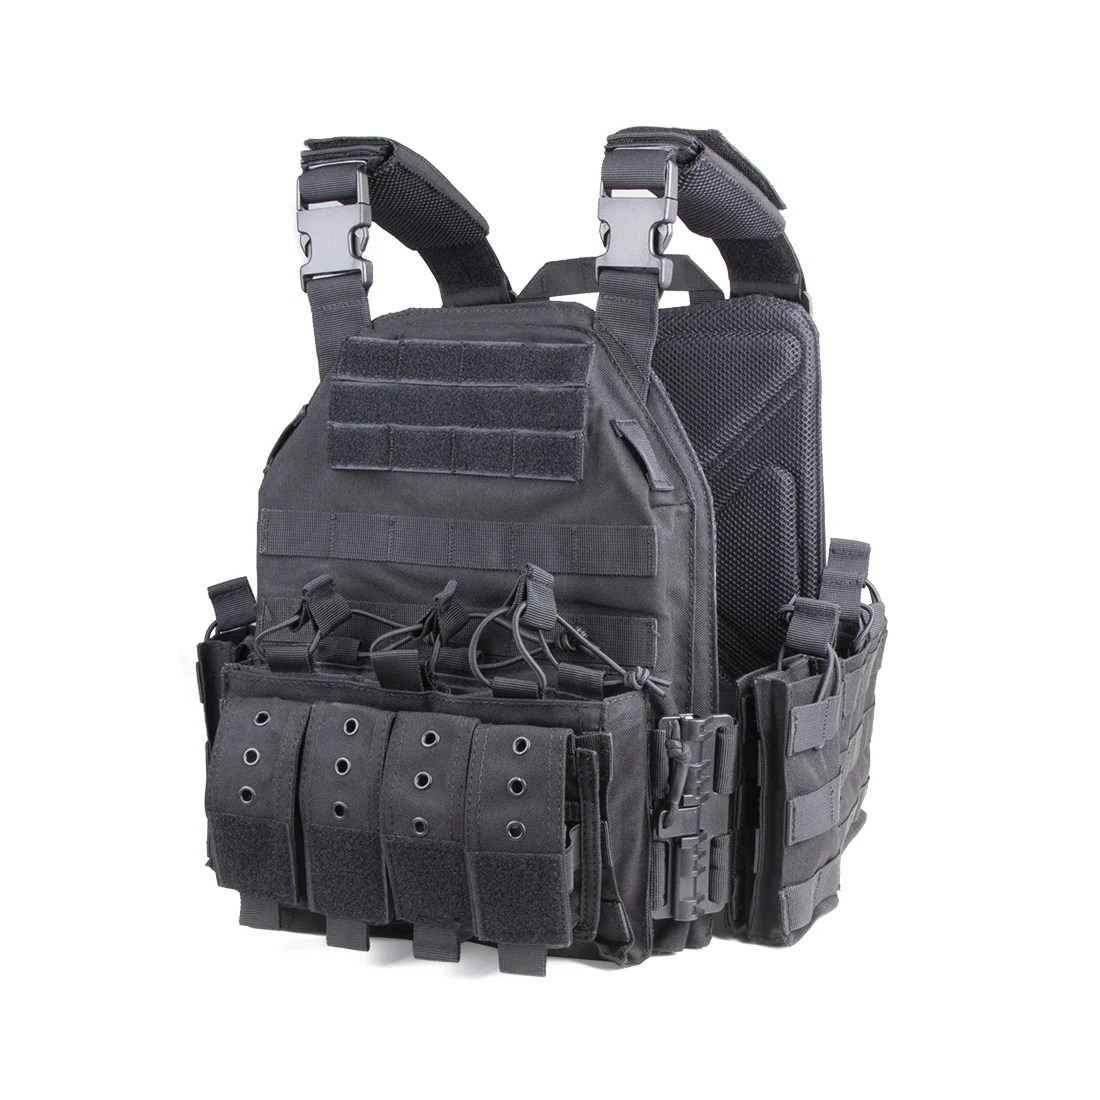 NcDe Molle Tactical Vest-104 Adjustable plate Carrier 1000D Nylon with Quick Release Version